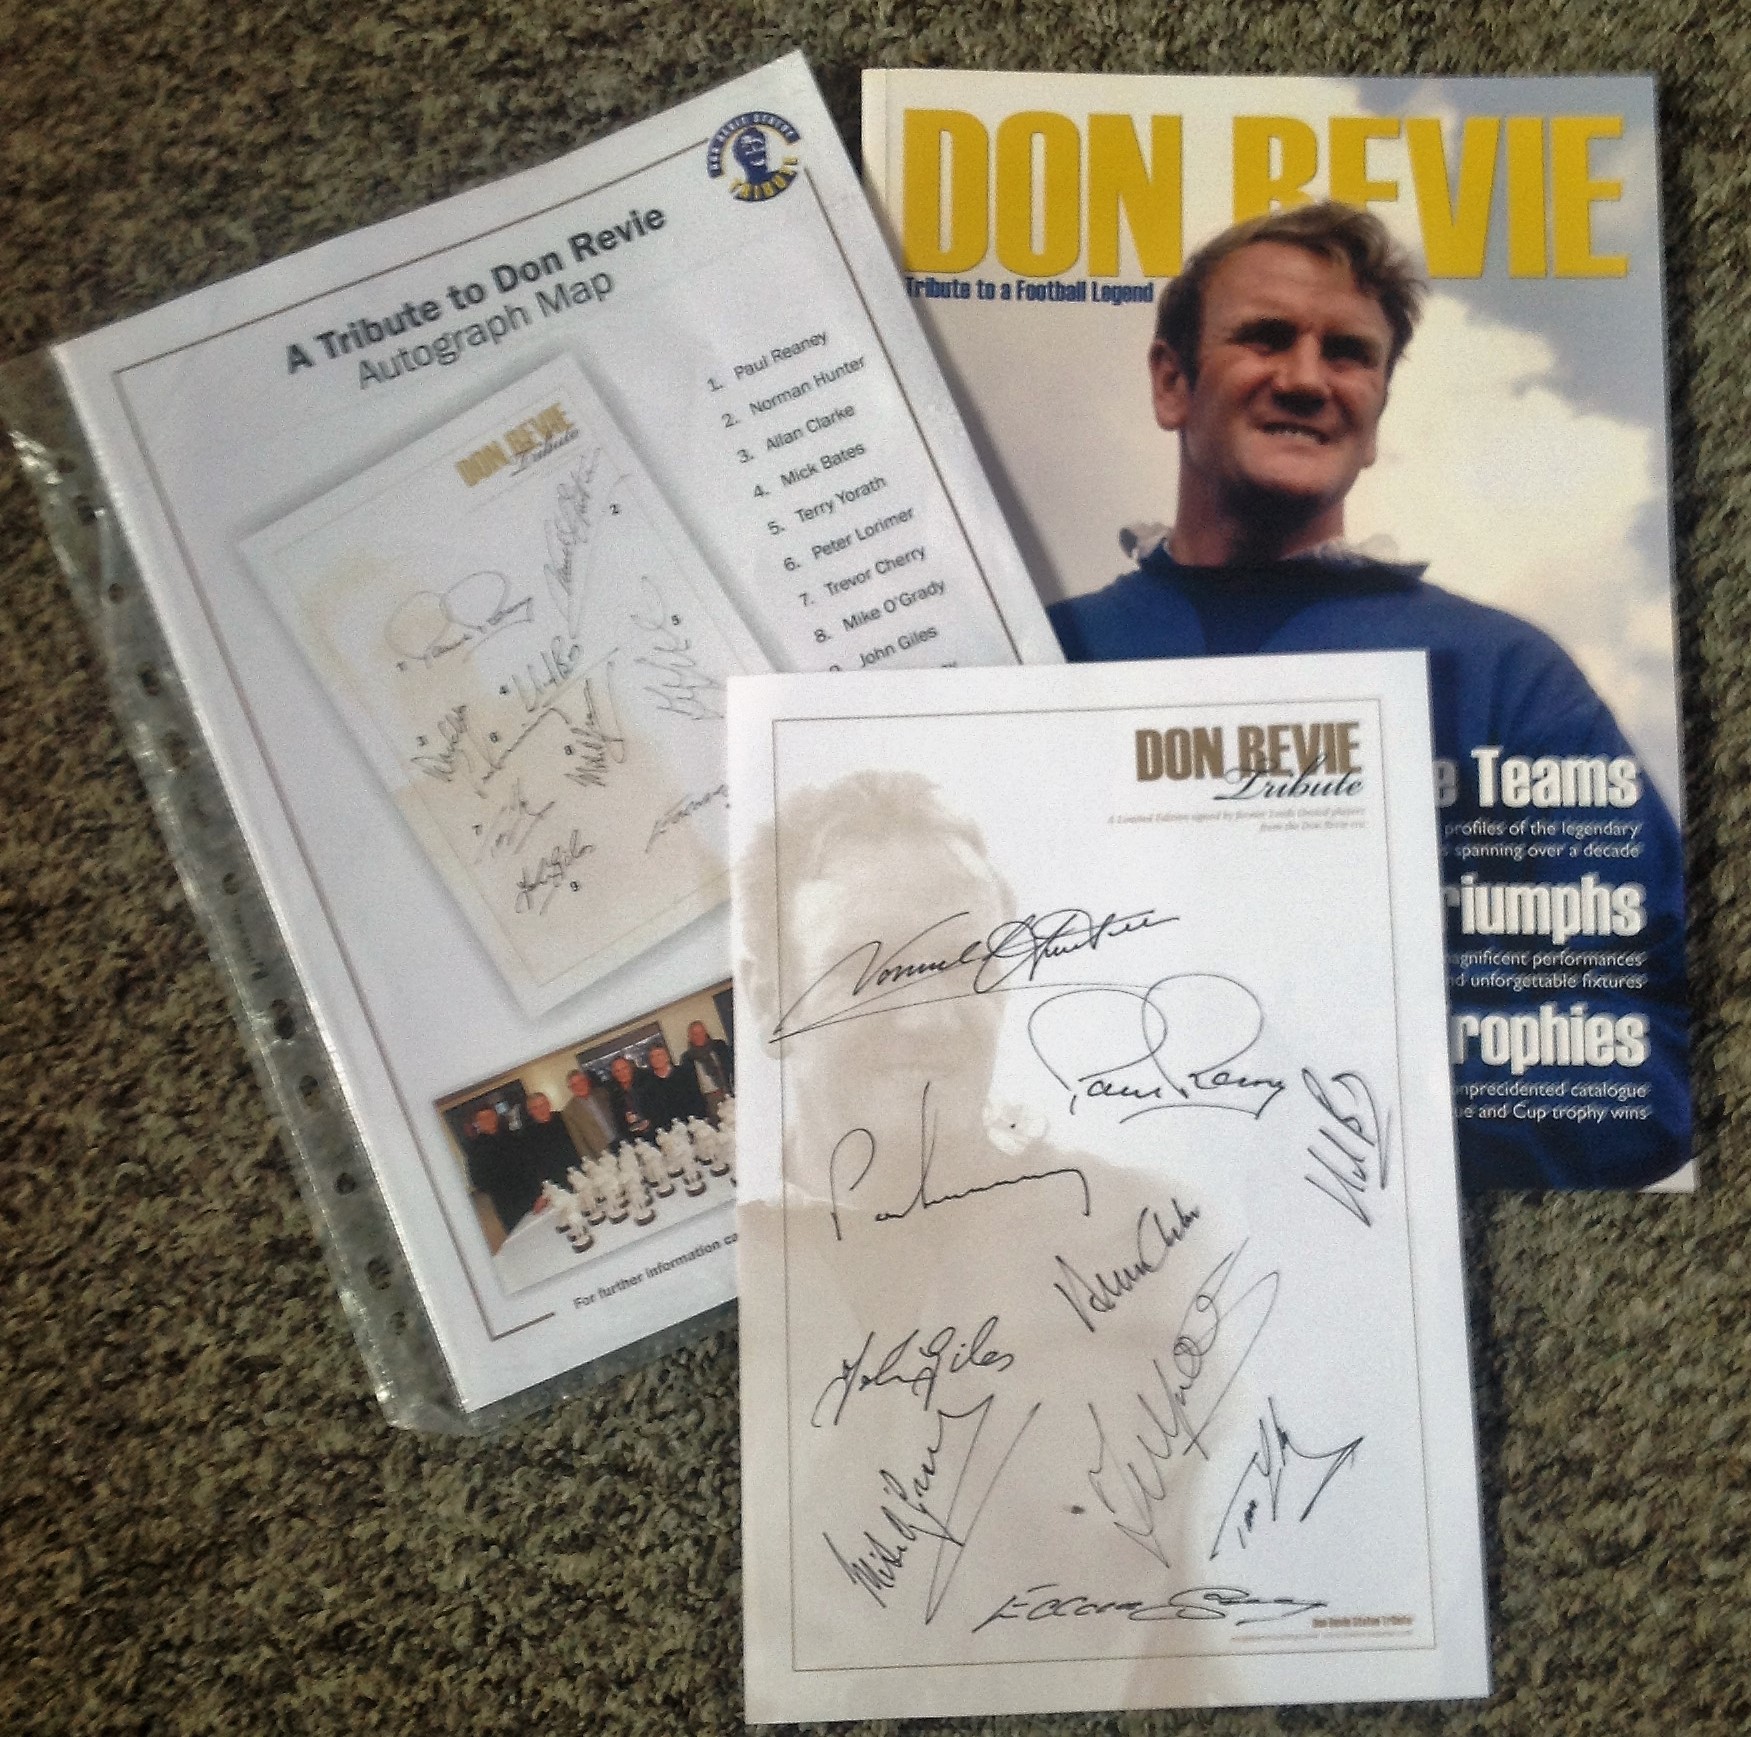 Leeds United collection includes Don Revie tribute to a football legend programme and a signature